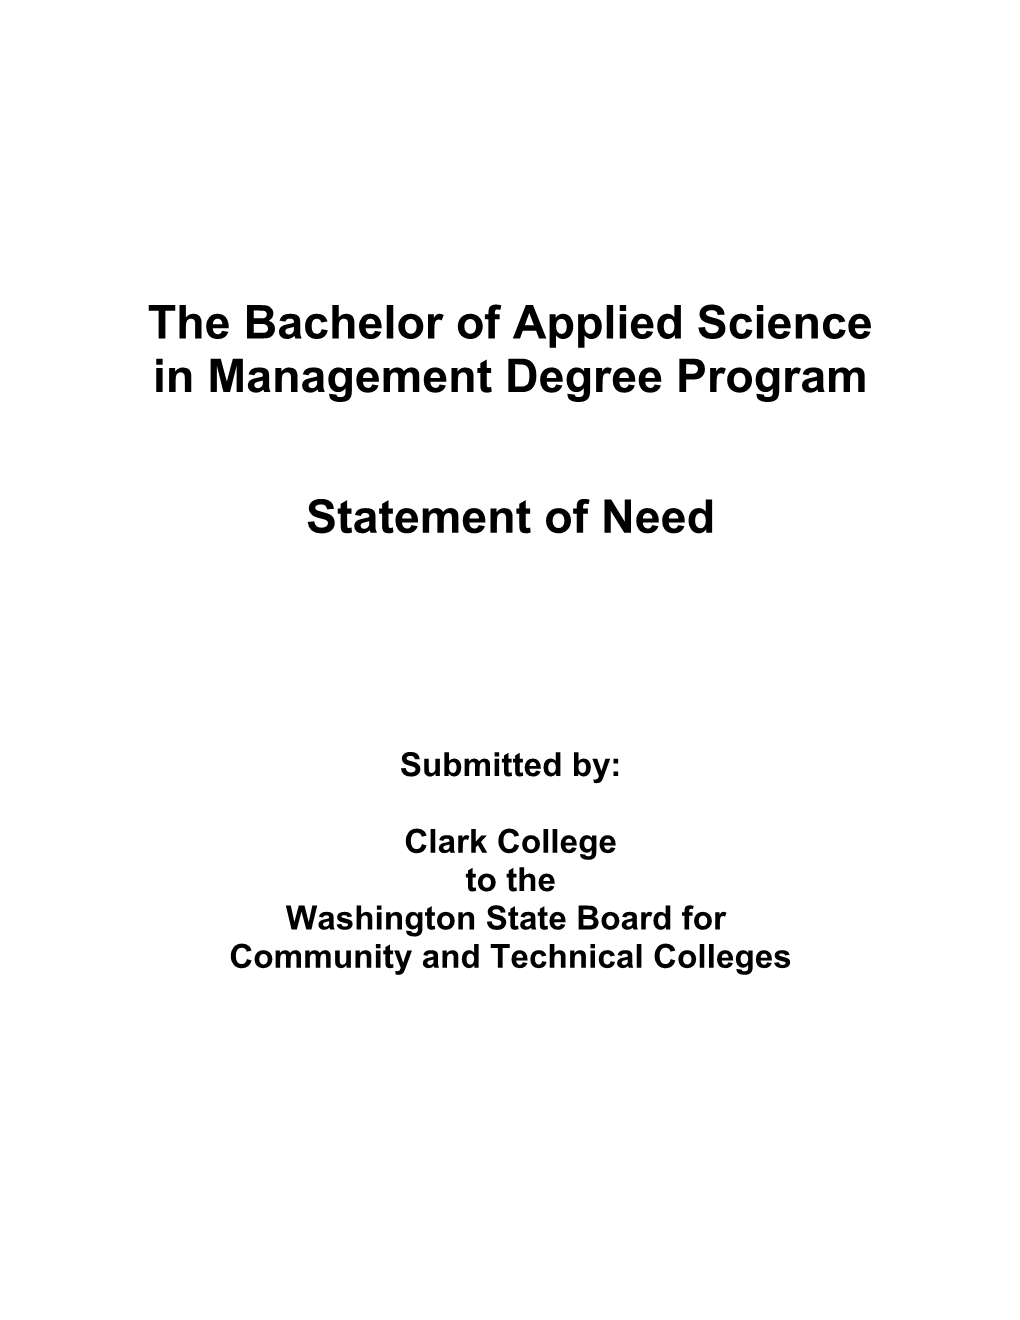 The Bachelor of Applied Science in Management Degree Program